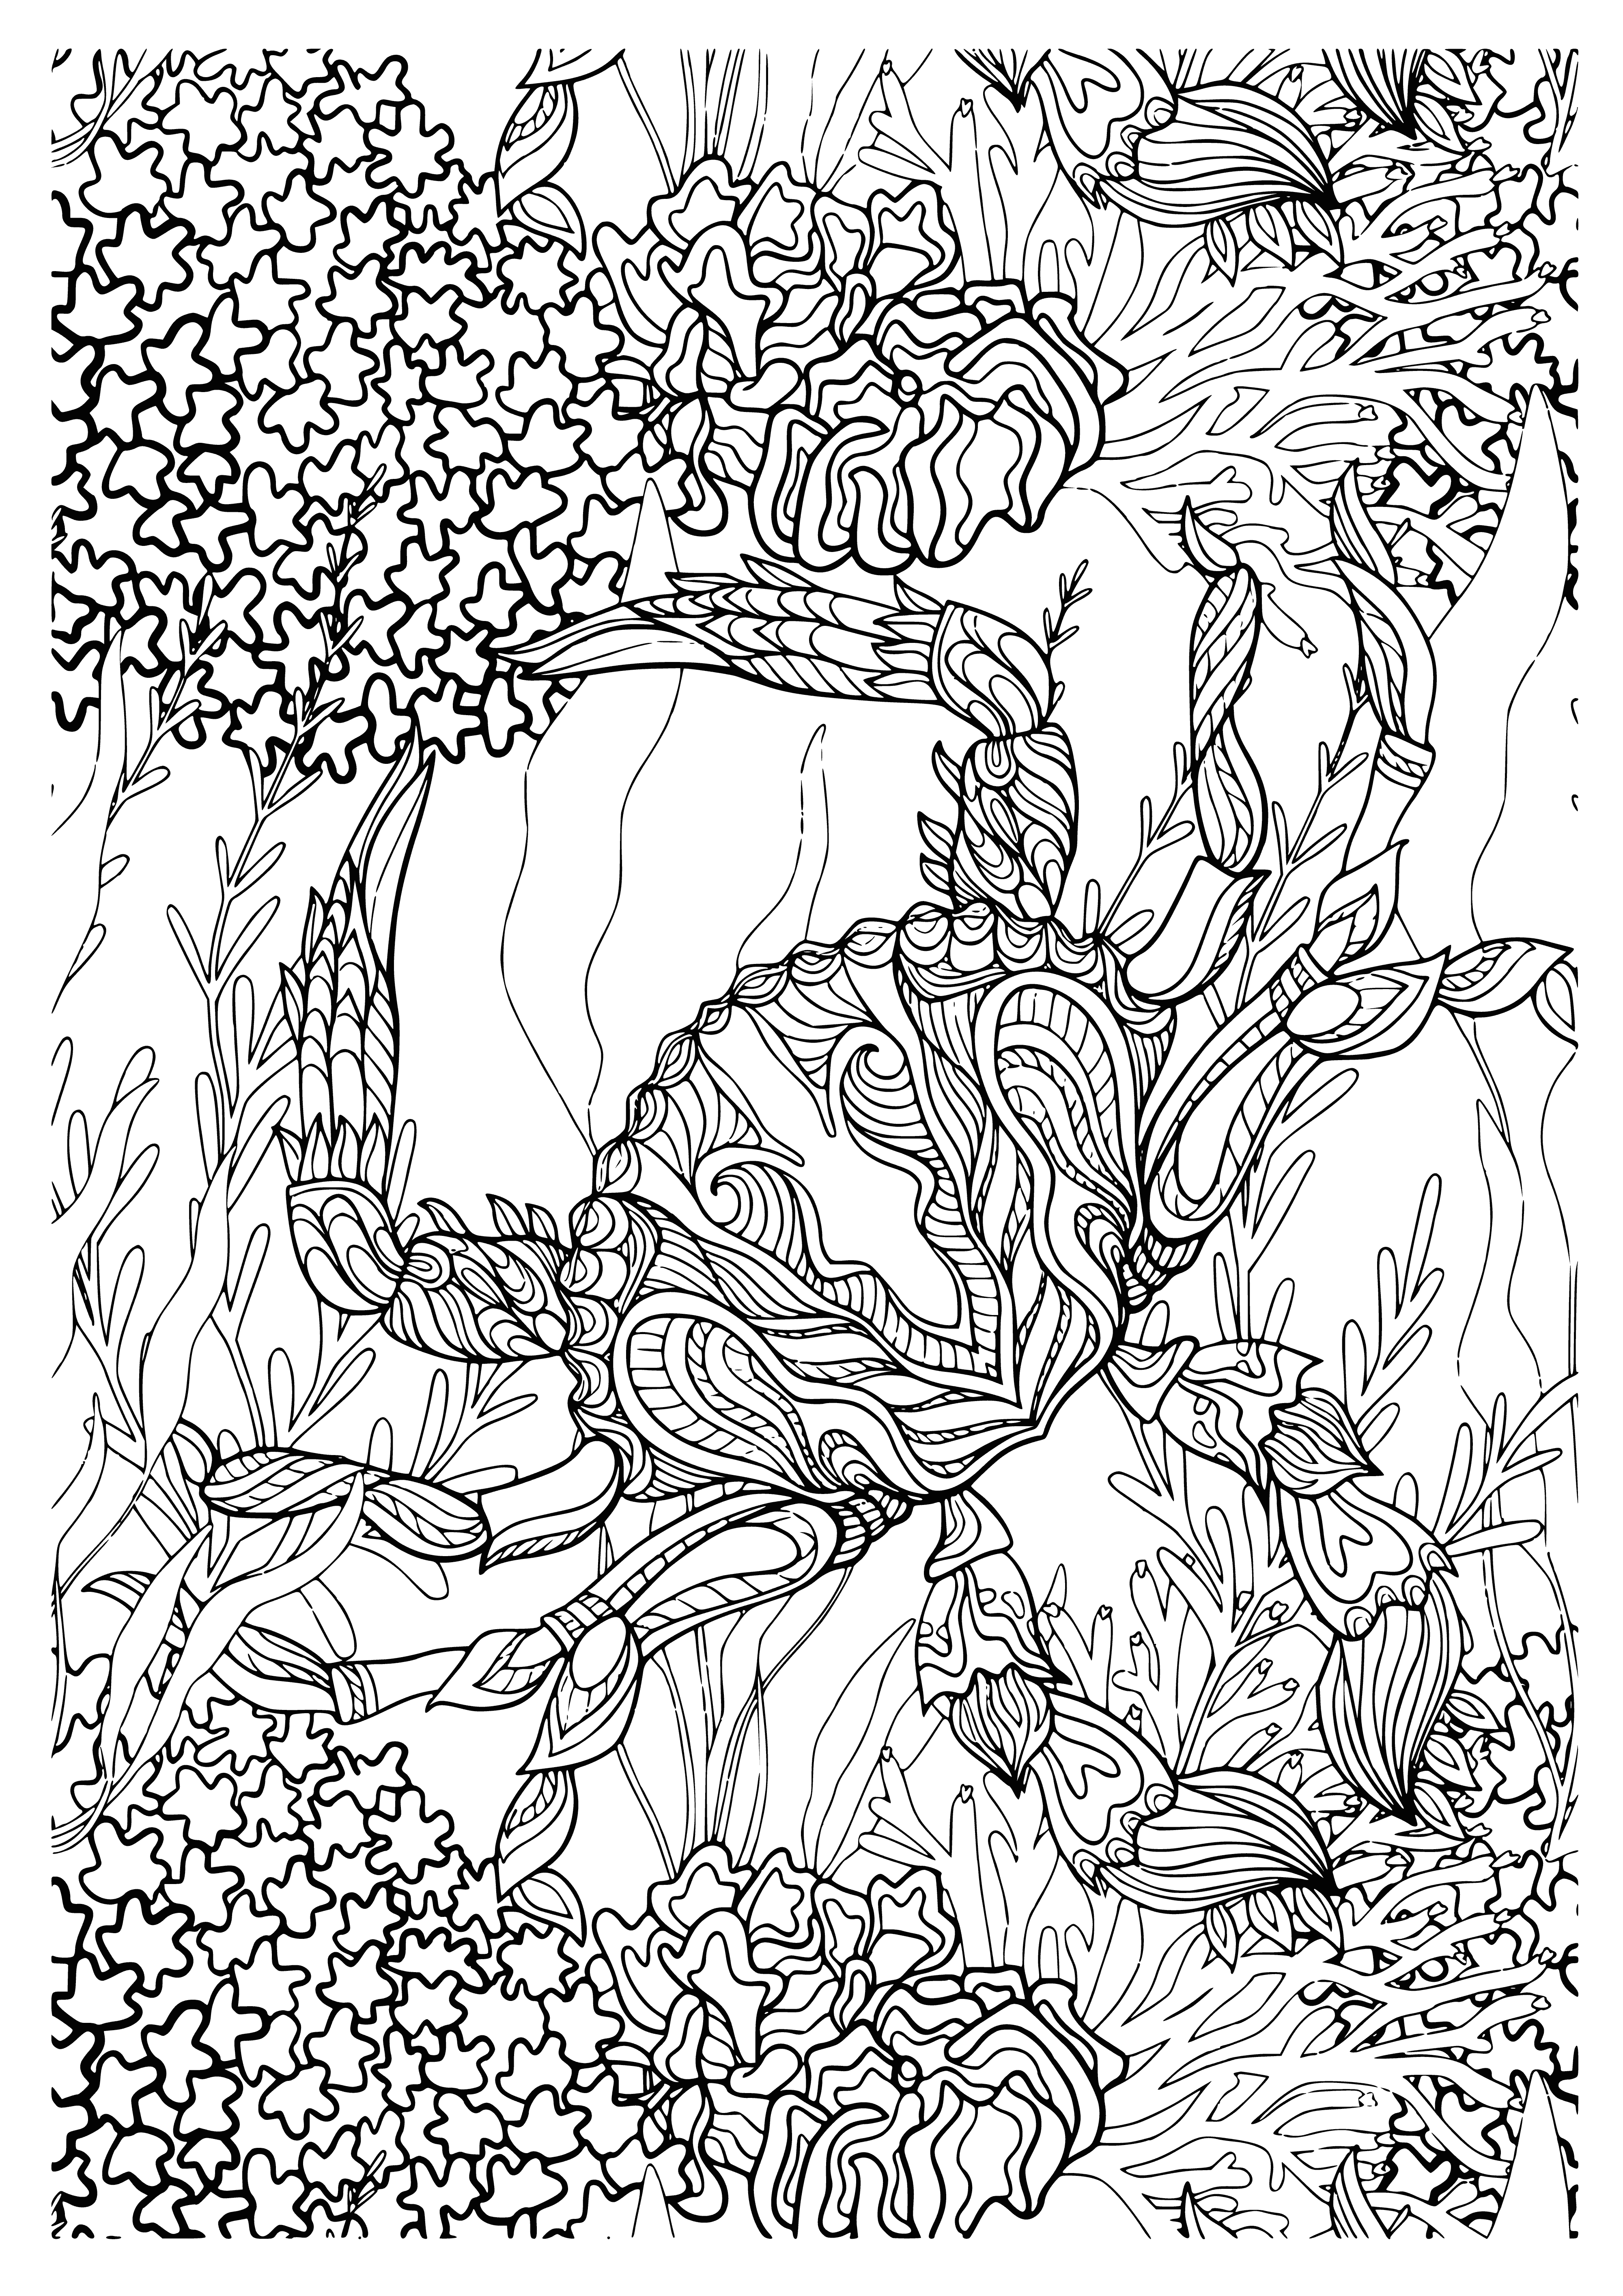 coloring page: Media-savvy sea crab crawls on the ocean floor, its hard exoskeleton deep red and legs striped with white. Claws extended while it moves forward.